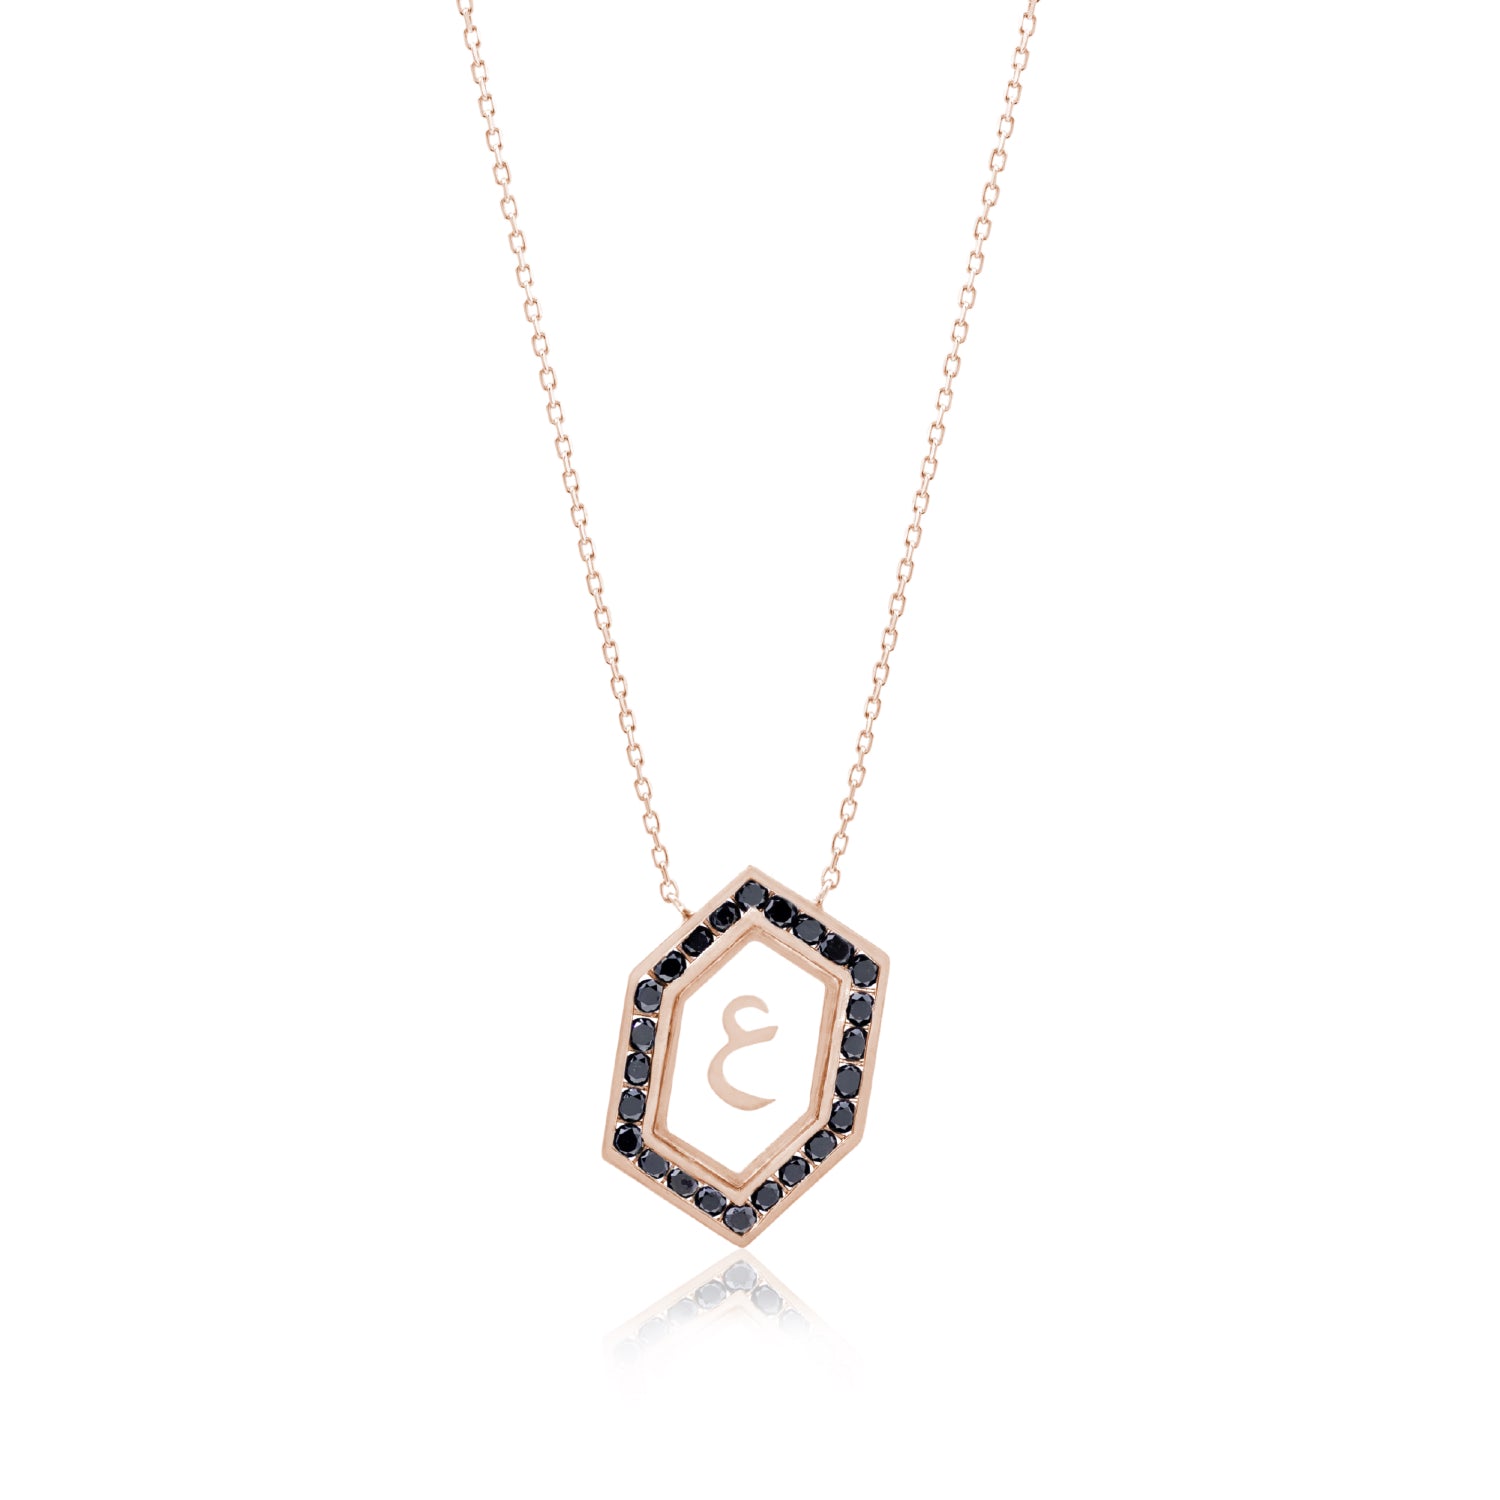 Qamoos 1.0 Letter ع Black Diamond Necklace in Rose Gold